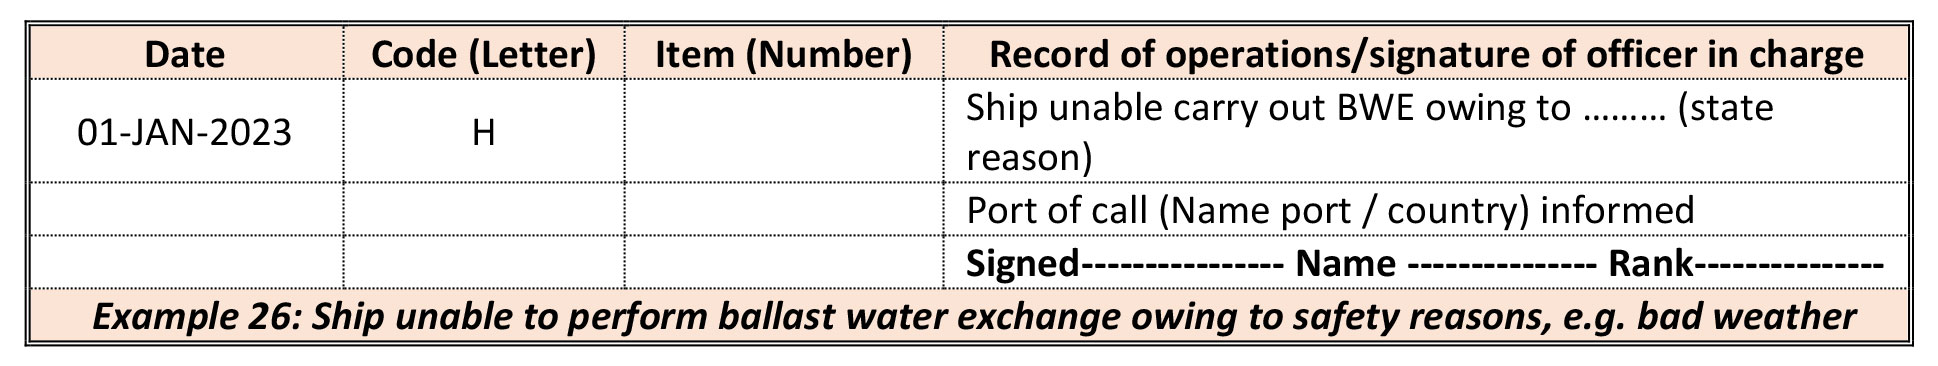 Guidance on ballast water record-keeping and reporting